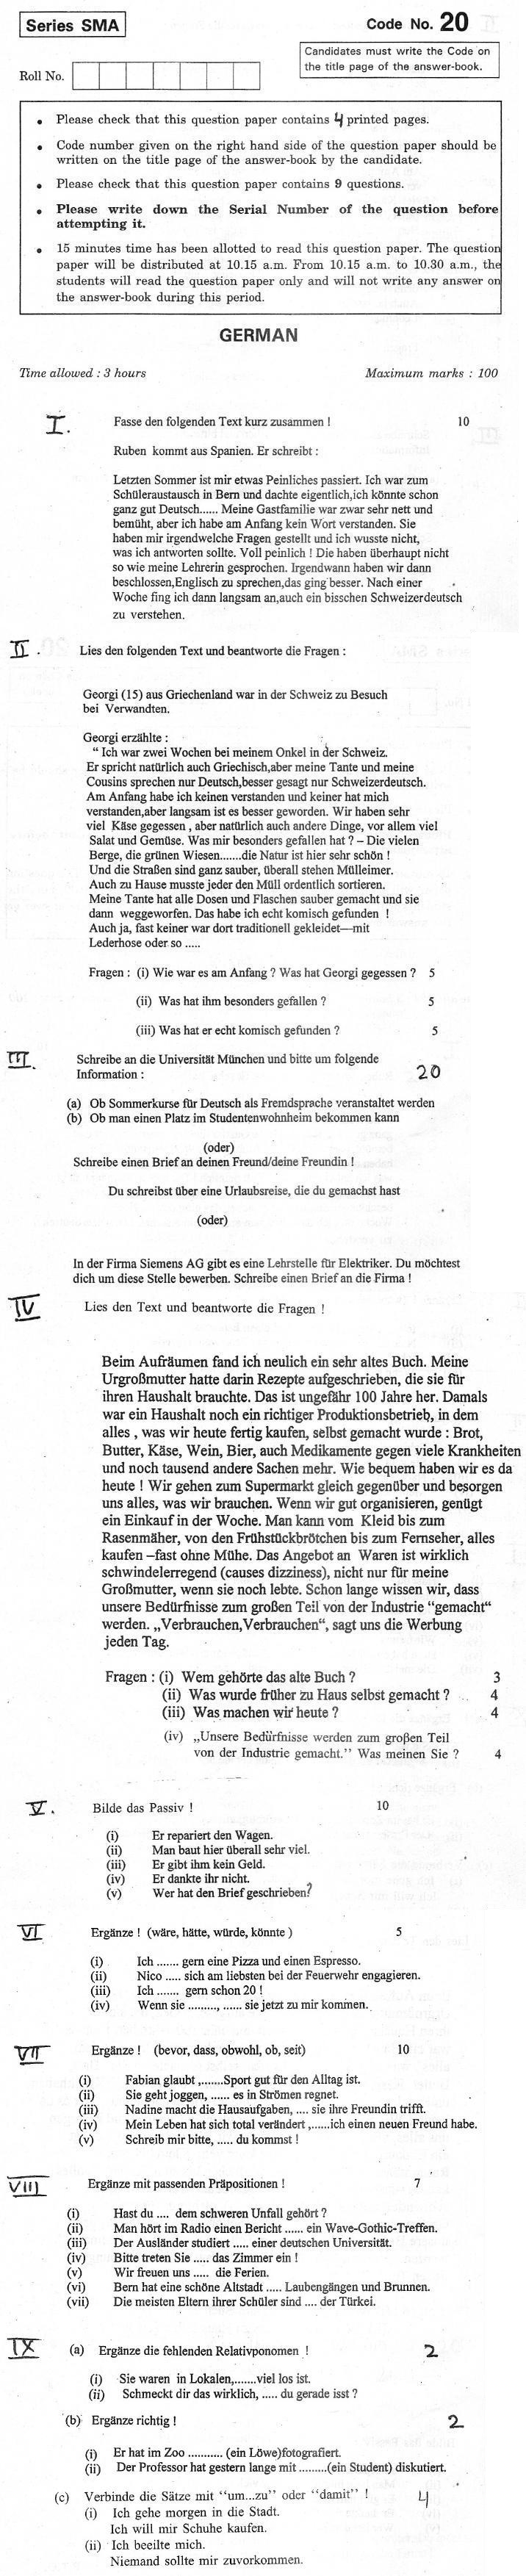 CBSE Class XII Previous Year Question Paper 2012 German